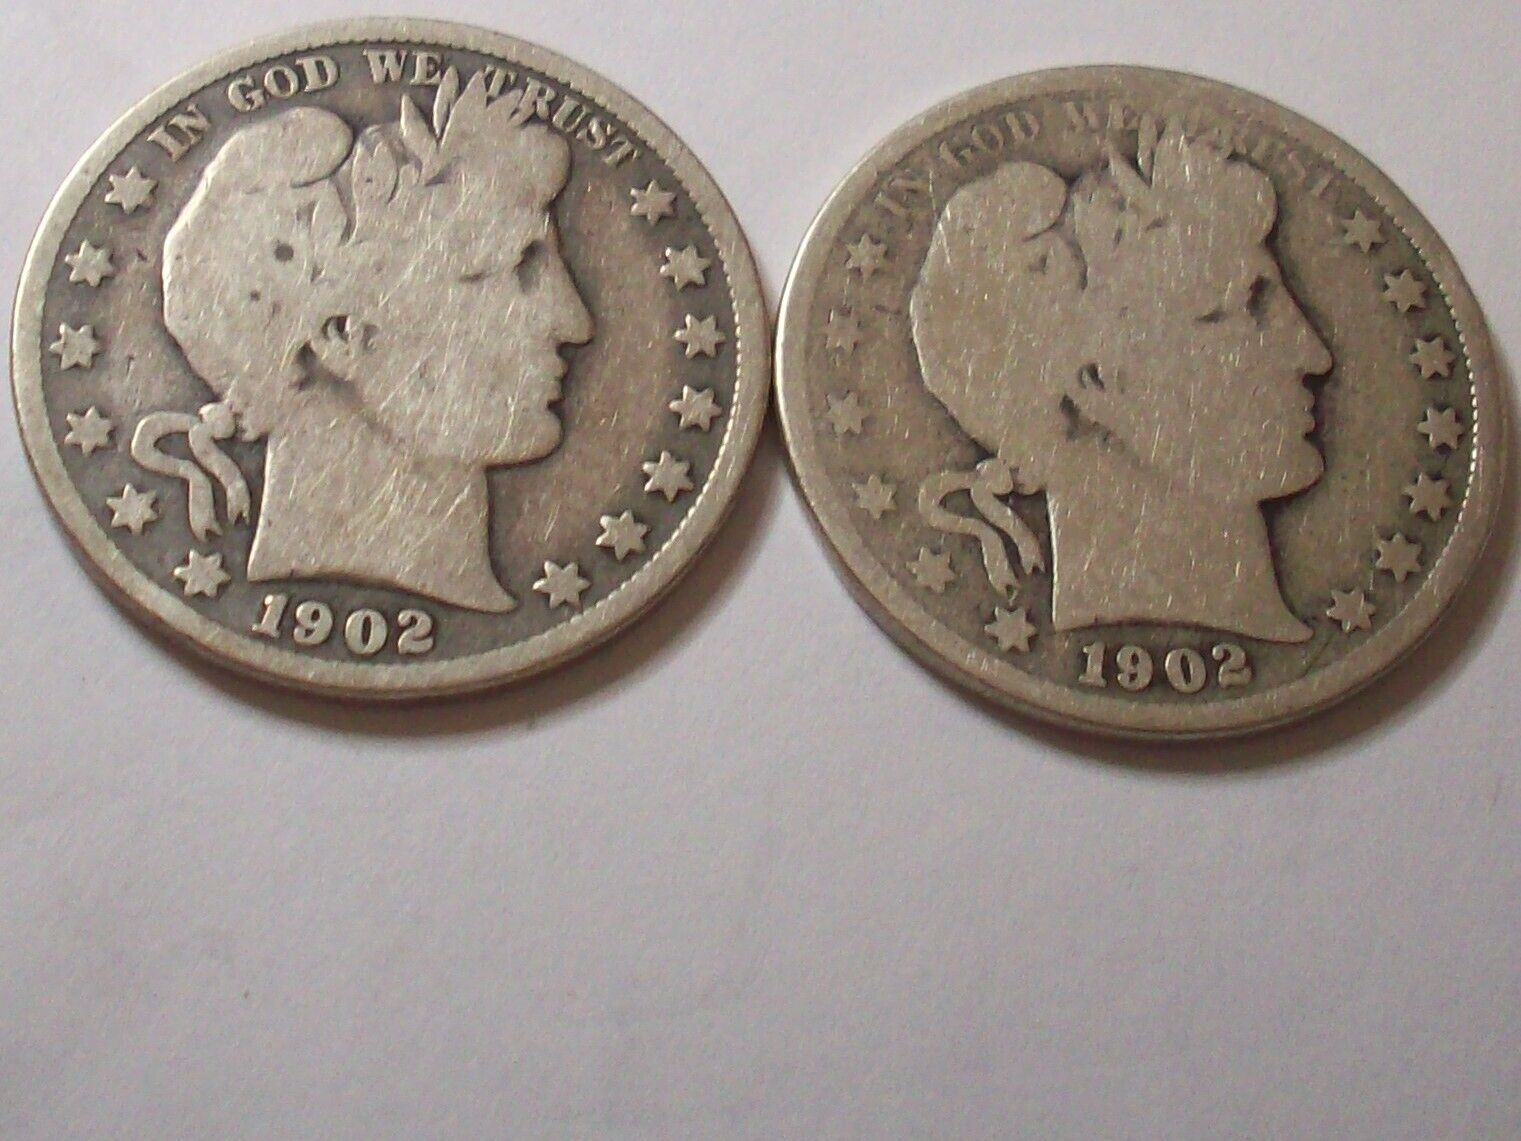 1902 1902 O 2 Early 90% Silver Barber Liberty Half Dollars Lot Coins 50 Cents